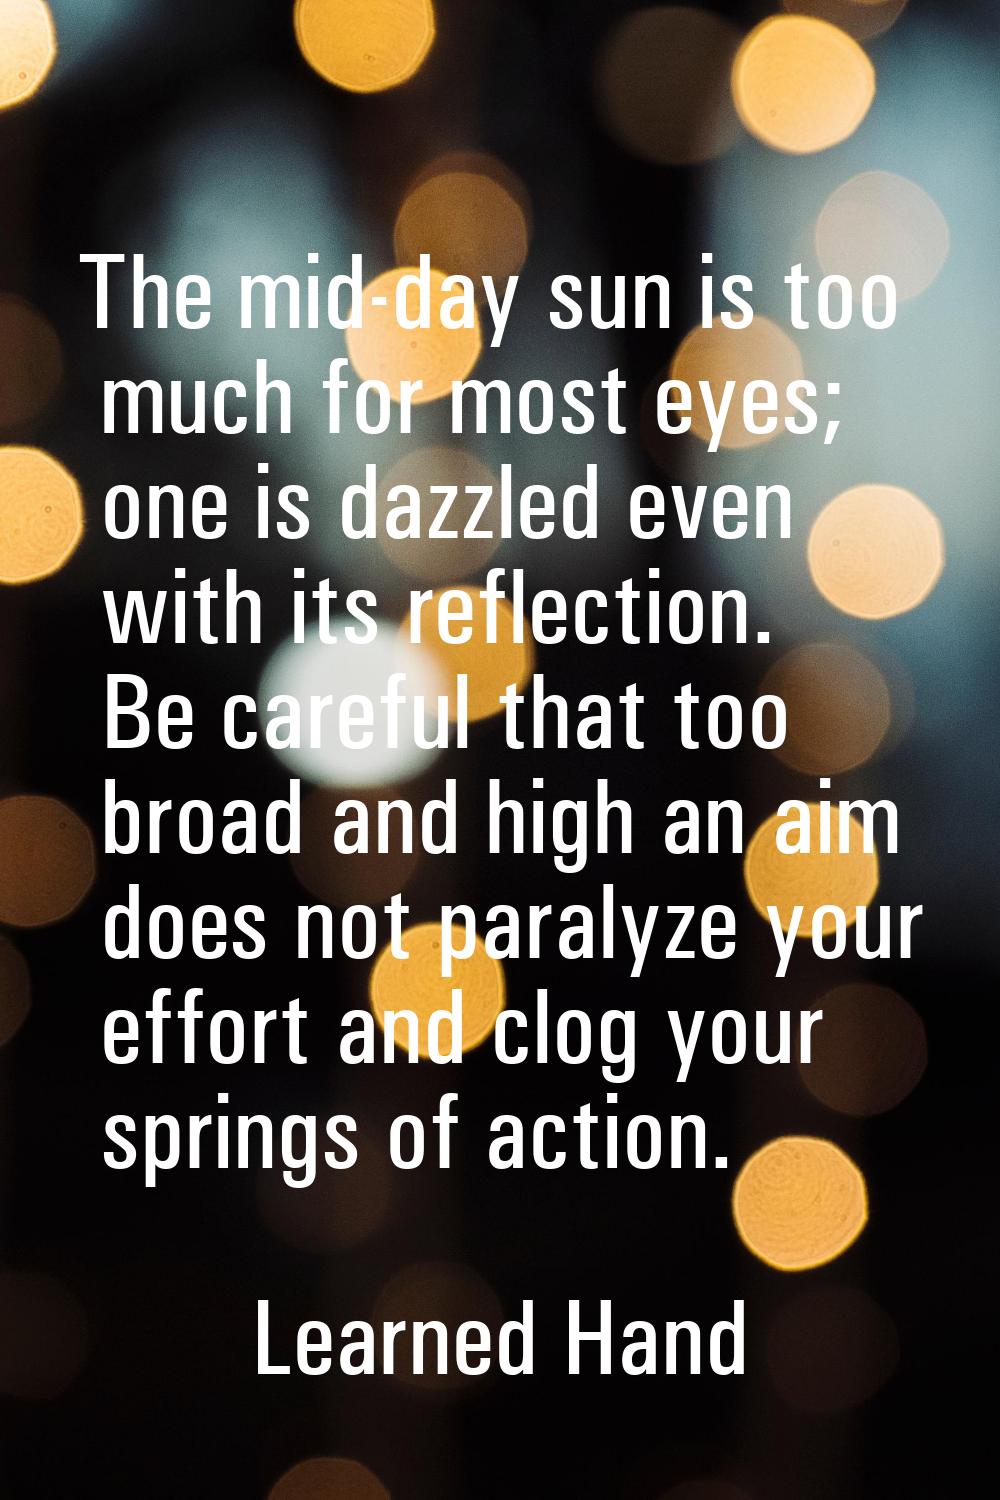 The mid-day sun is too much for most eyes; one is dazzled even with its reflection. Be careful that